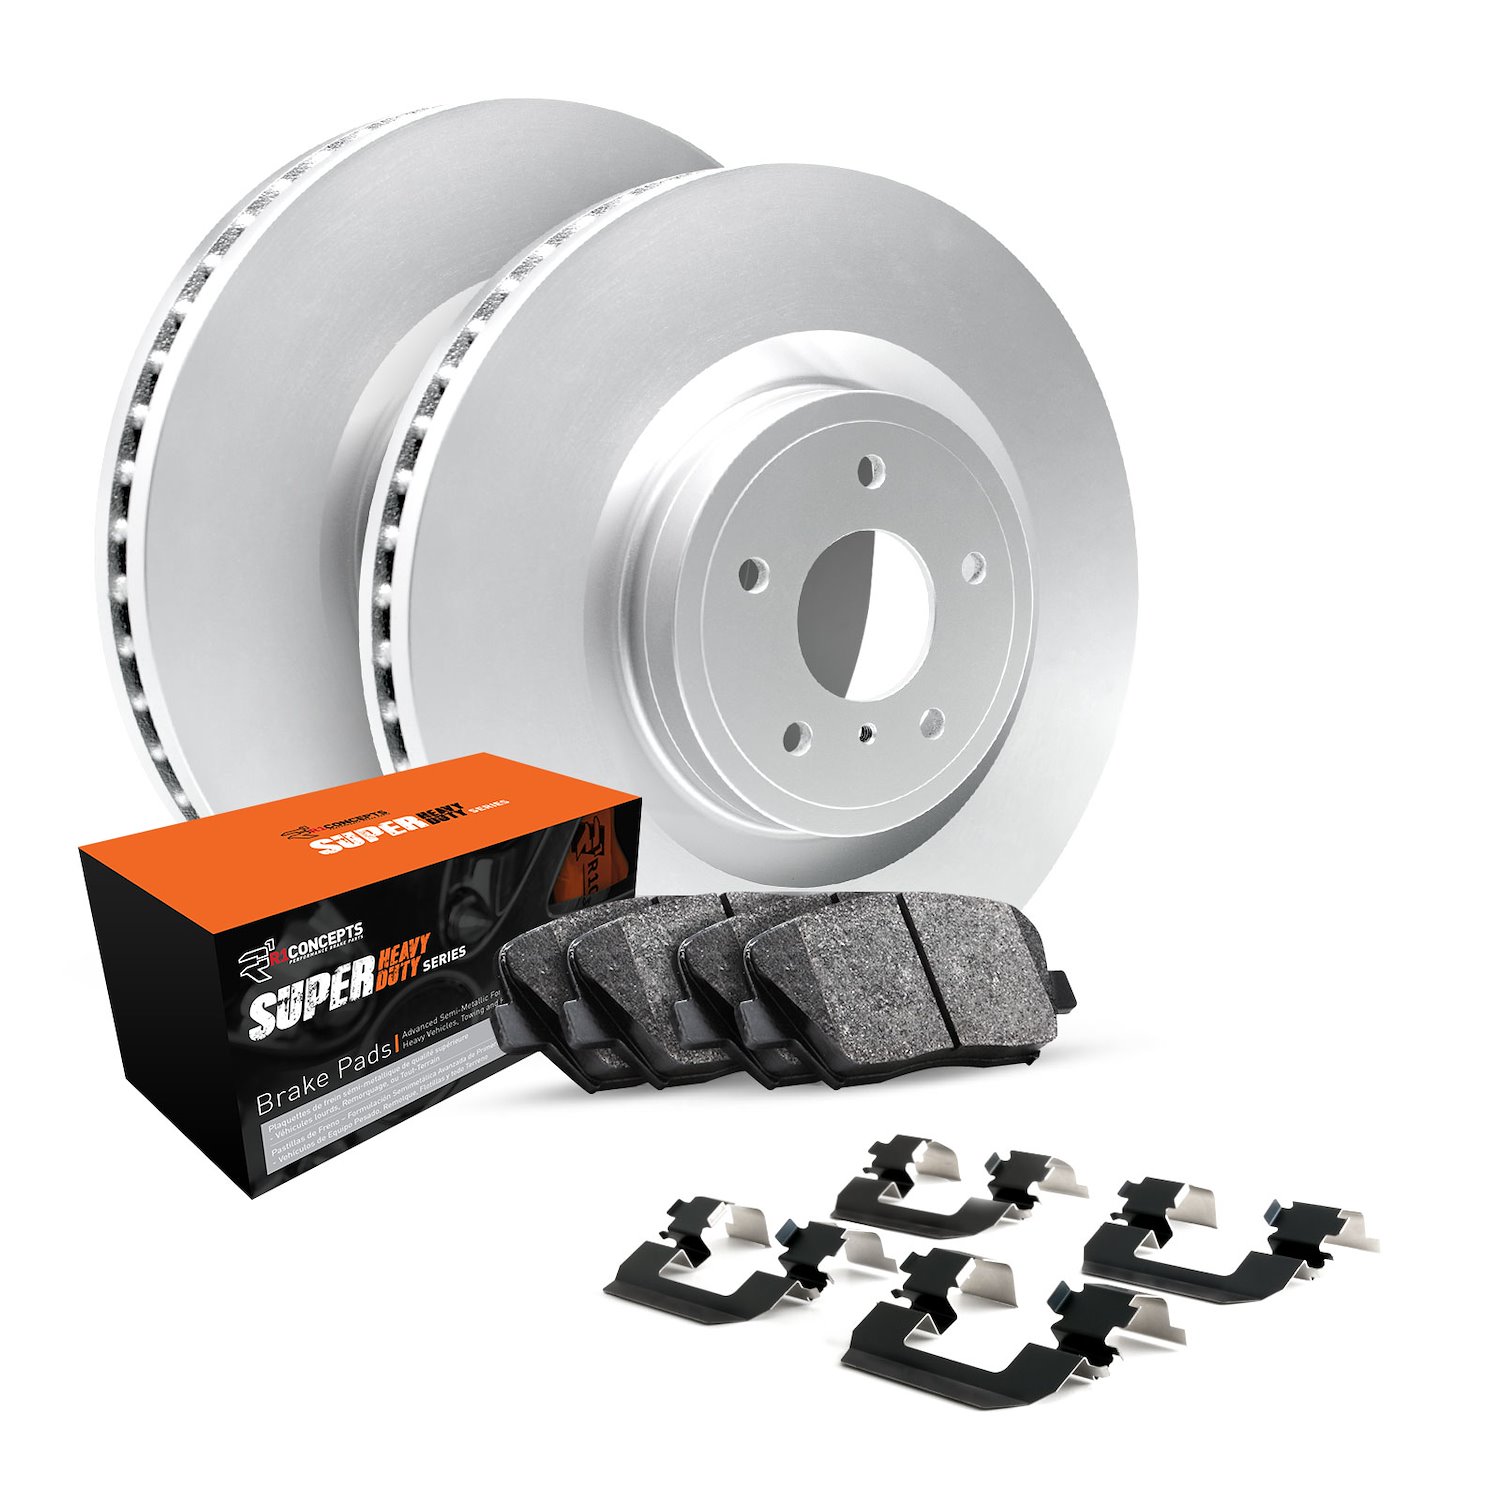 GEO-Carbon Brake Rotor Set w/Super-Duty Pads & Hardware, Fits Select Lexus/Toyota/Scion, Position: Front